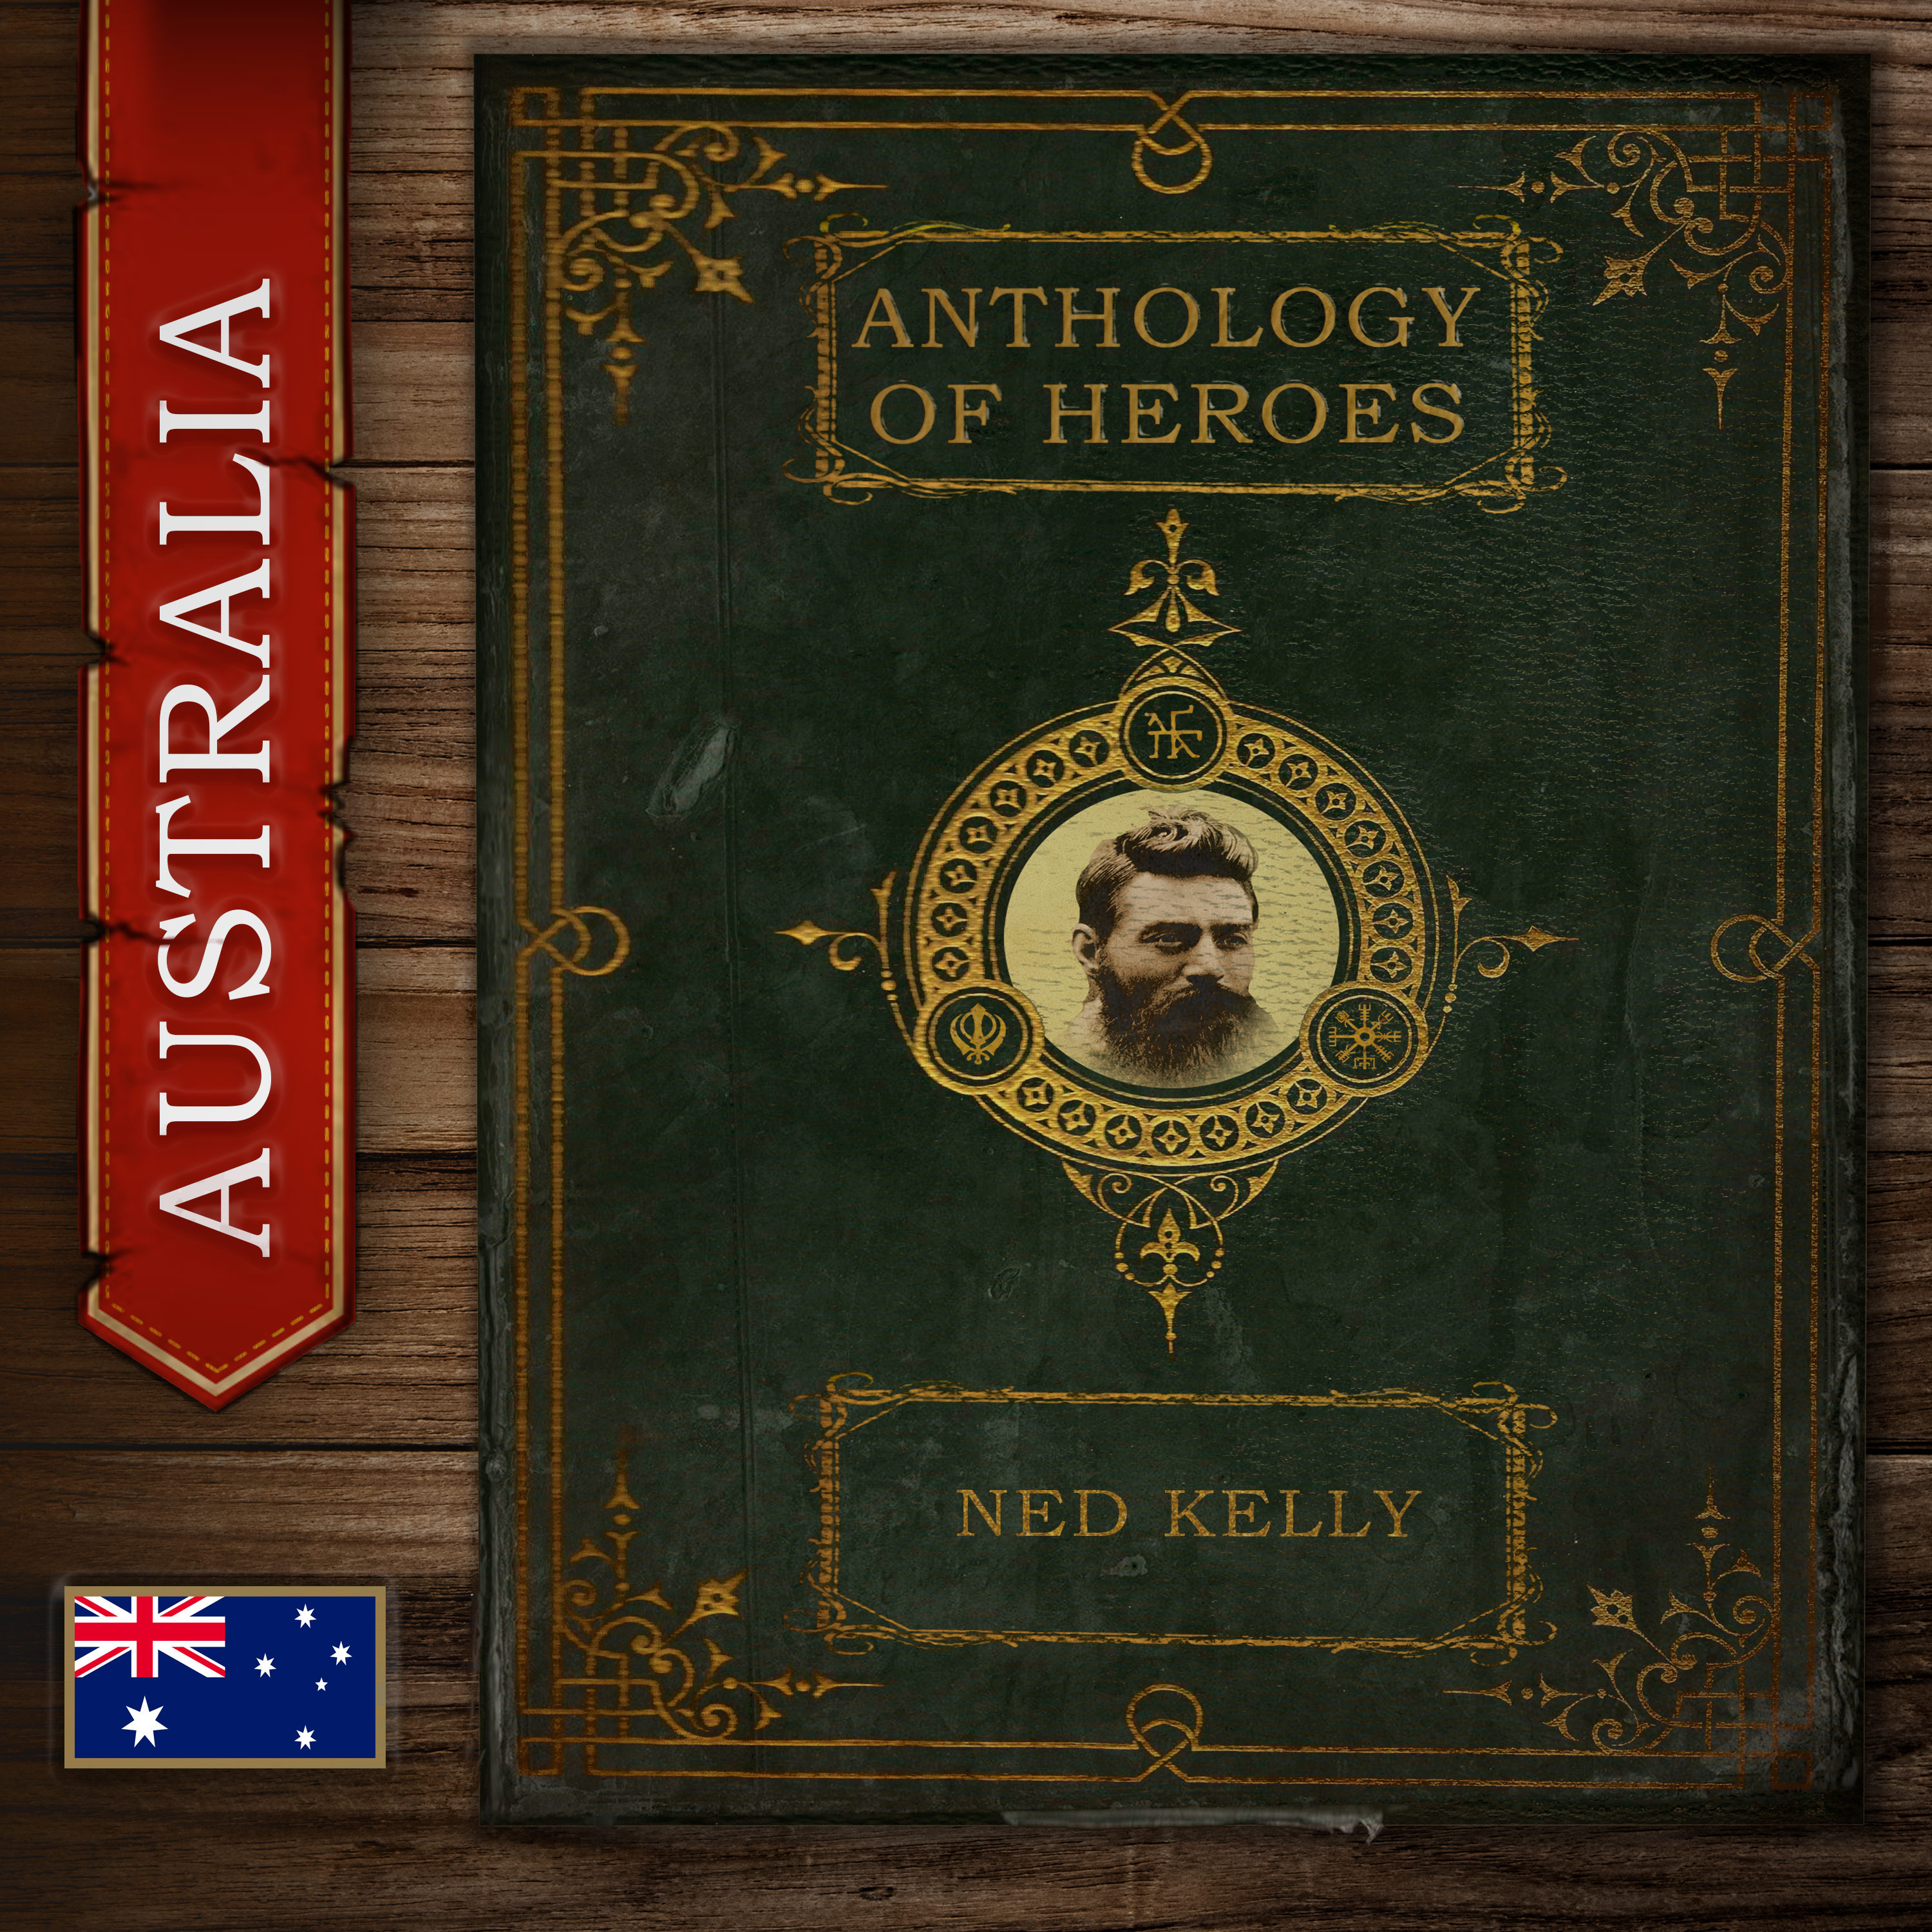 Australian Outlaw Ned Kelly and His Gang Image